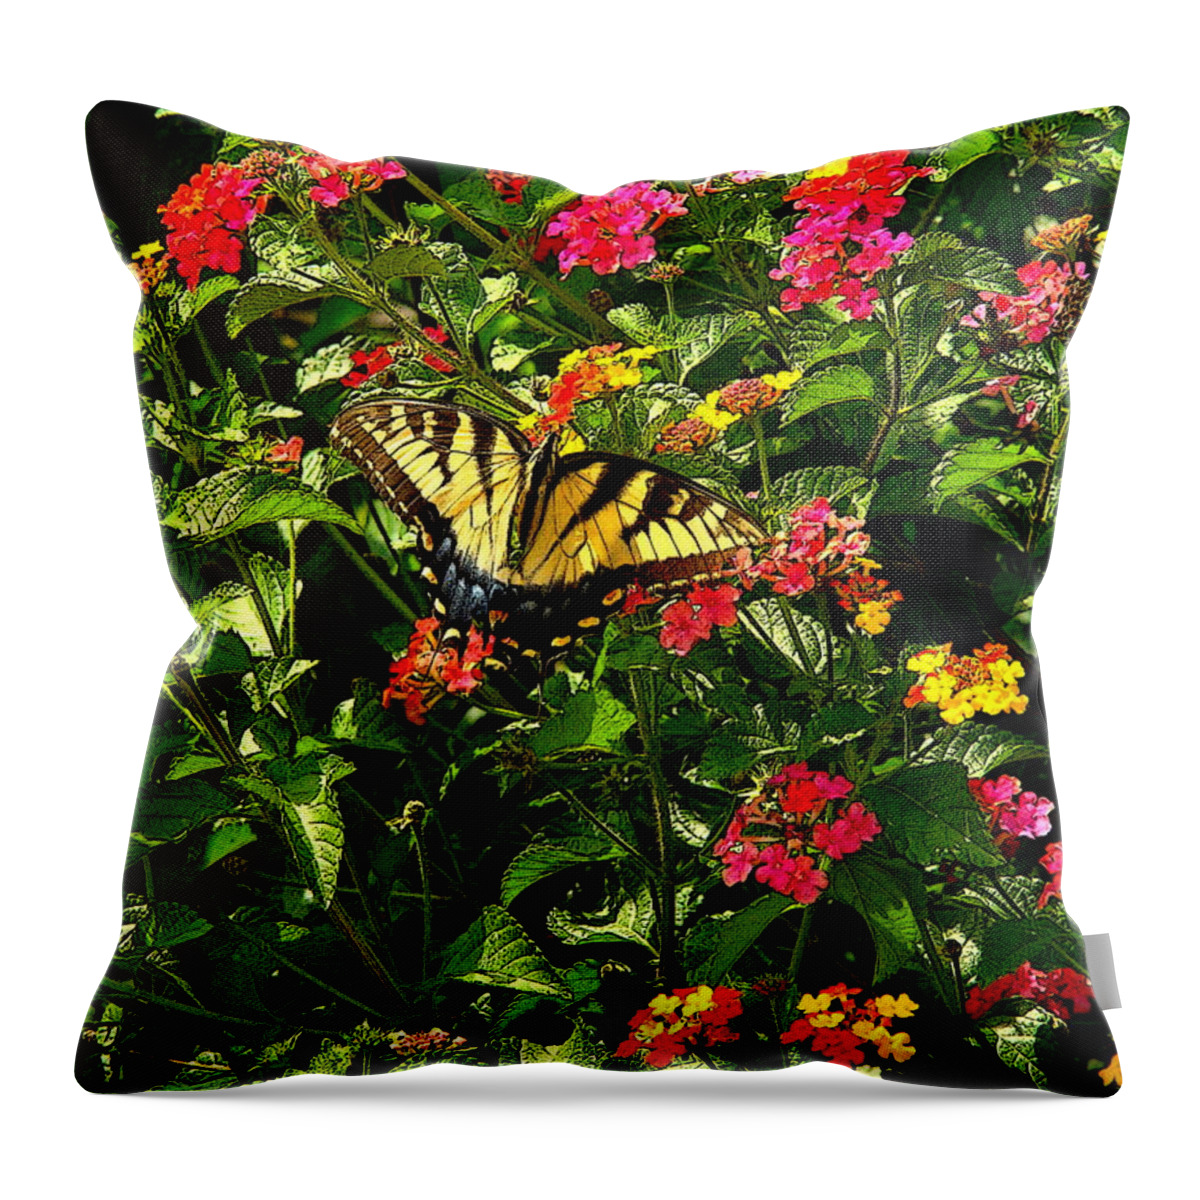 Fine Art Throw Pillow featuring the photograph Suncatcher by Rodney Lee Williams